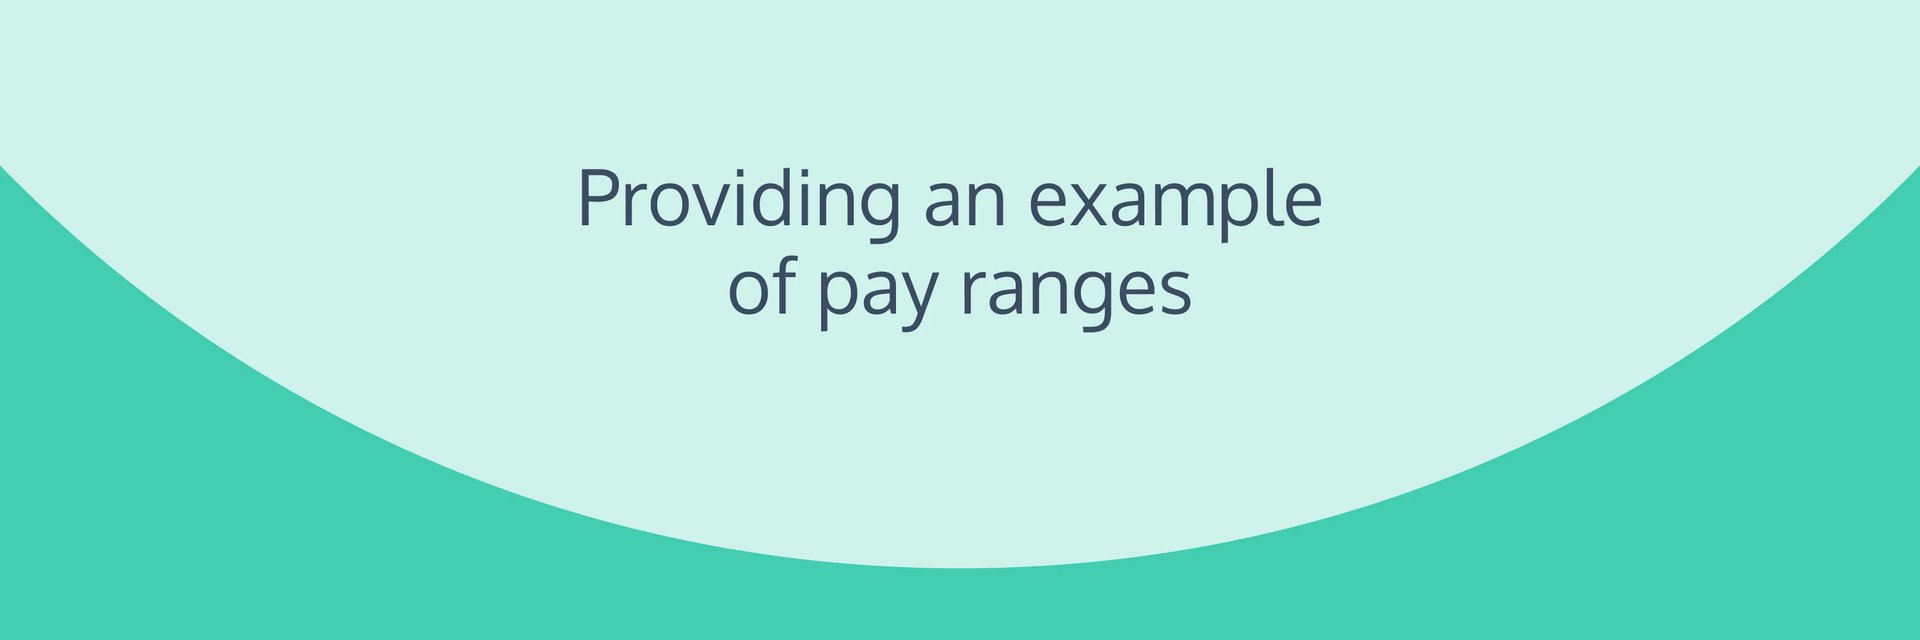 Providing an example of pay ranges